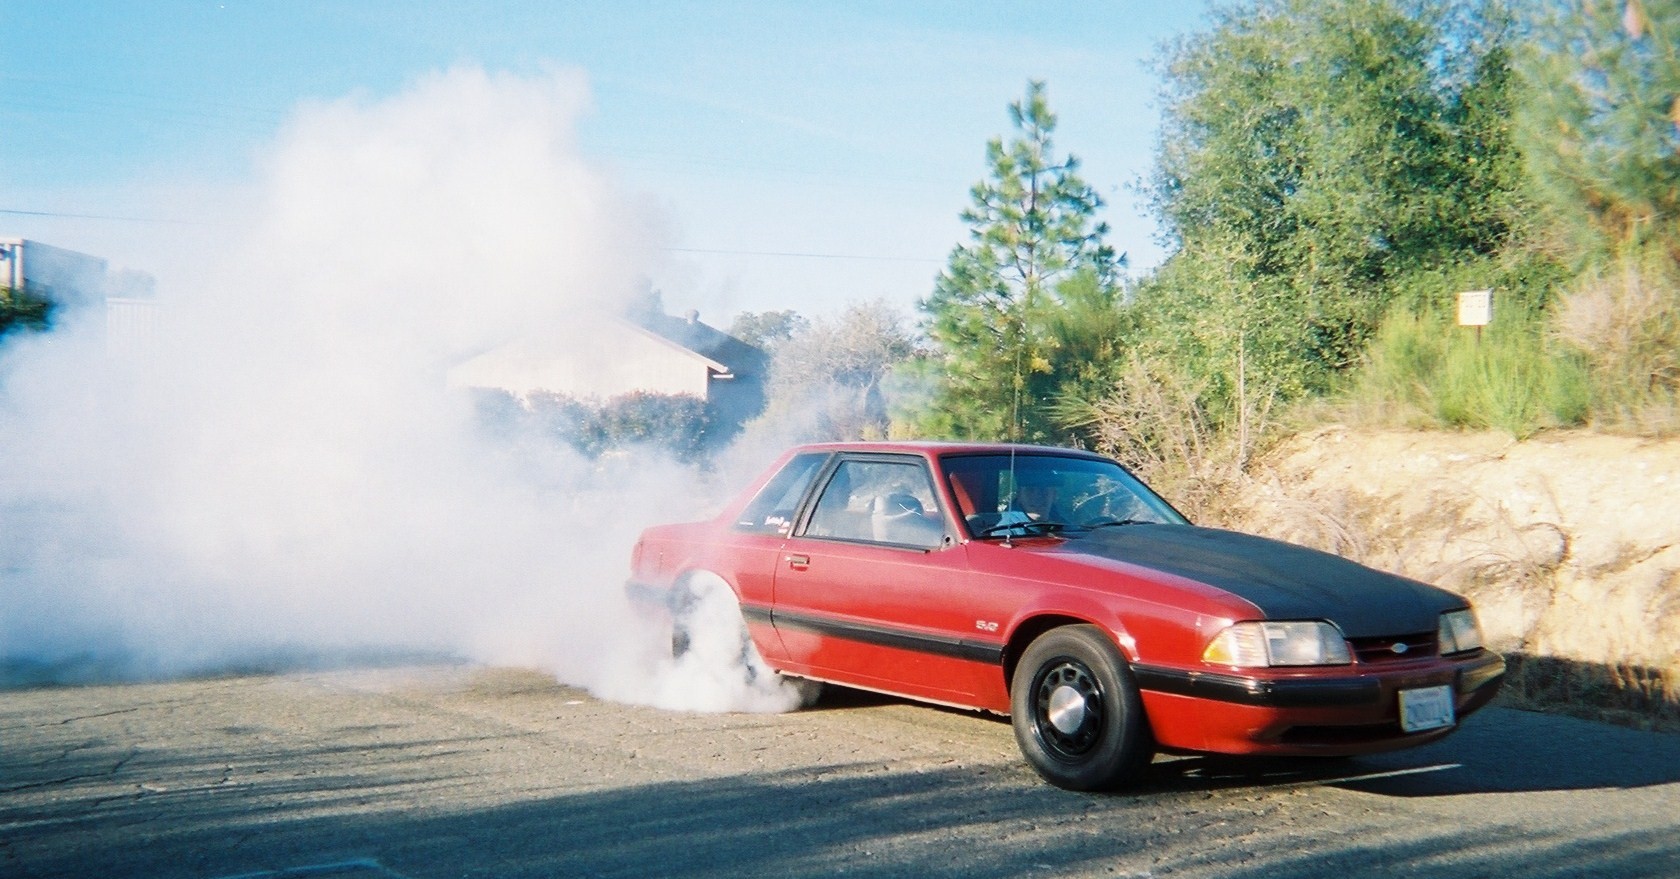  1989 Ford Mustang lx notch